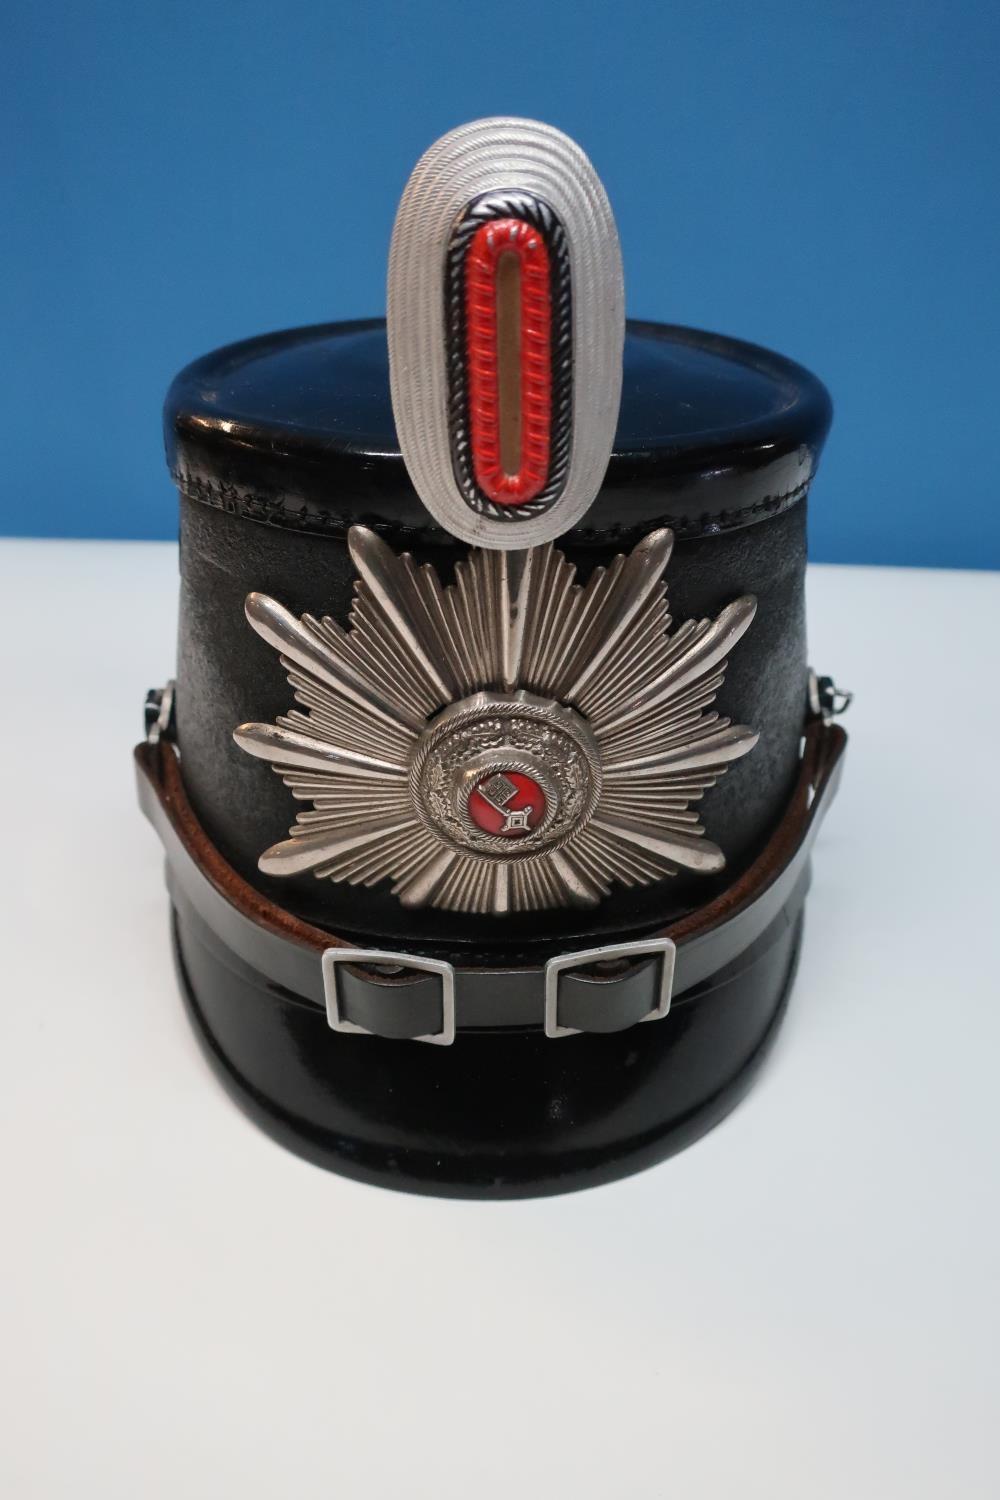 Circa WWI German military shako with central badge for Bavarian states and white oval metal hackle - Image 2 of 3